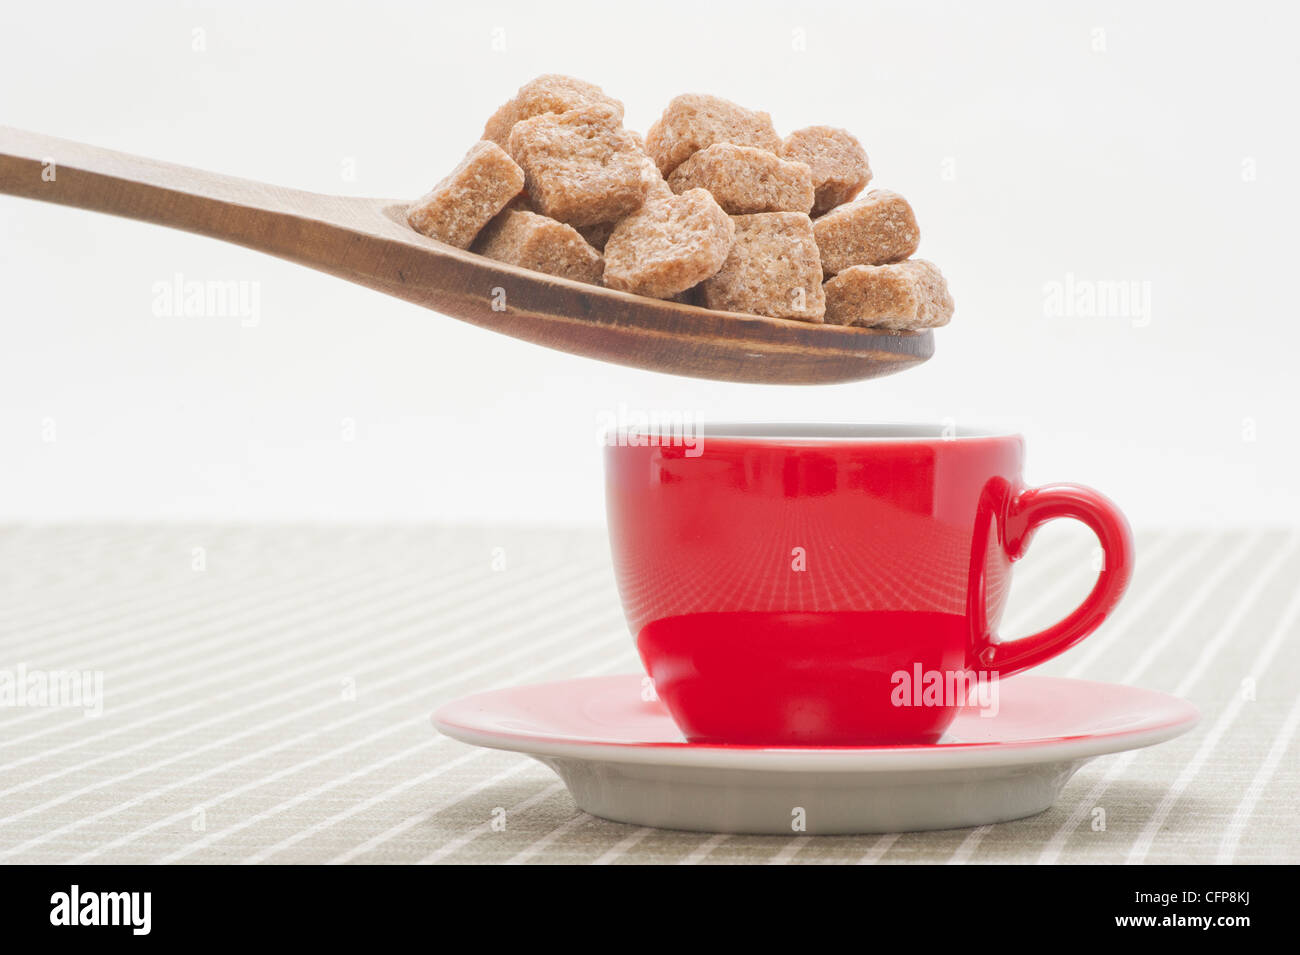 Excessive amount of brown sugar cubes being put in a red coffee cup Stock Photo